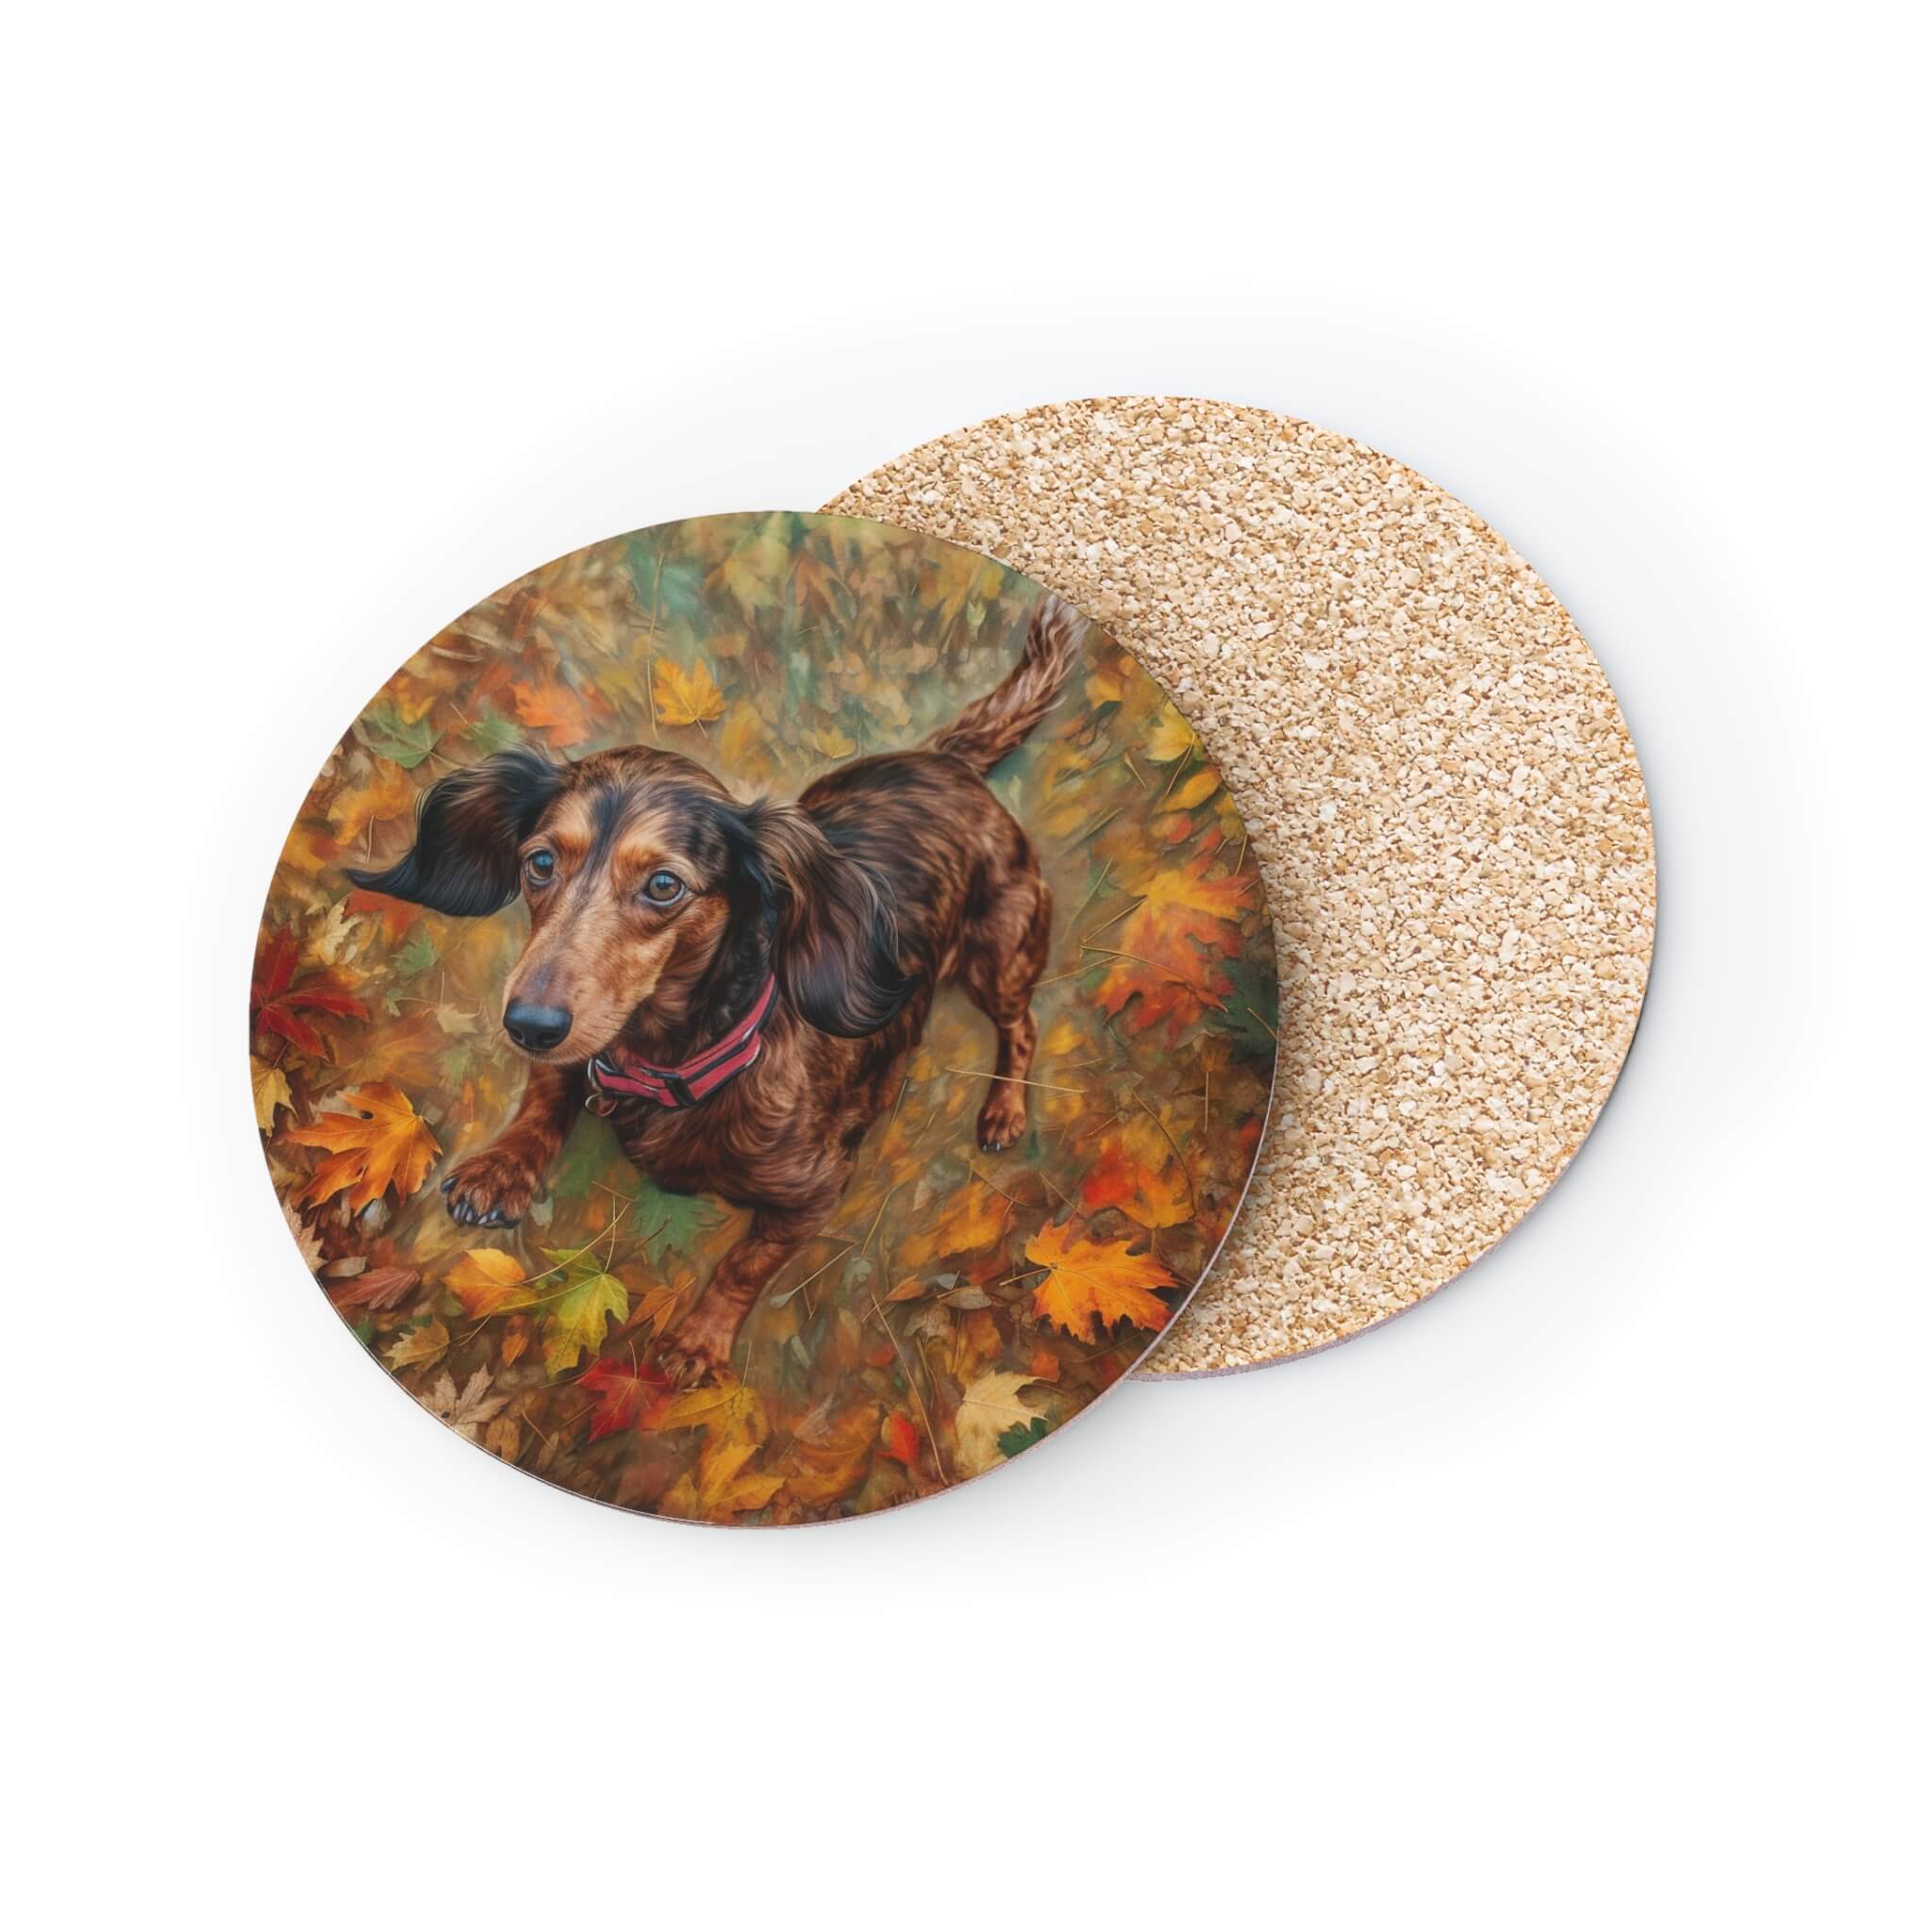 Dachshund Kitchen Decor: Adding a Dash of Adorable to Your Culinary Space